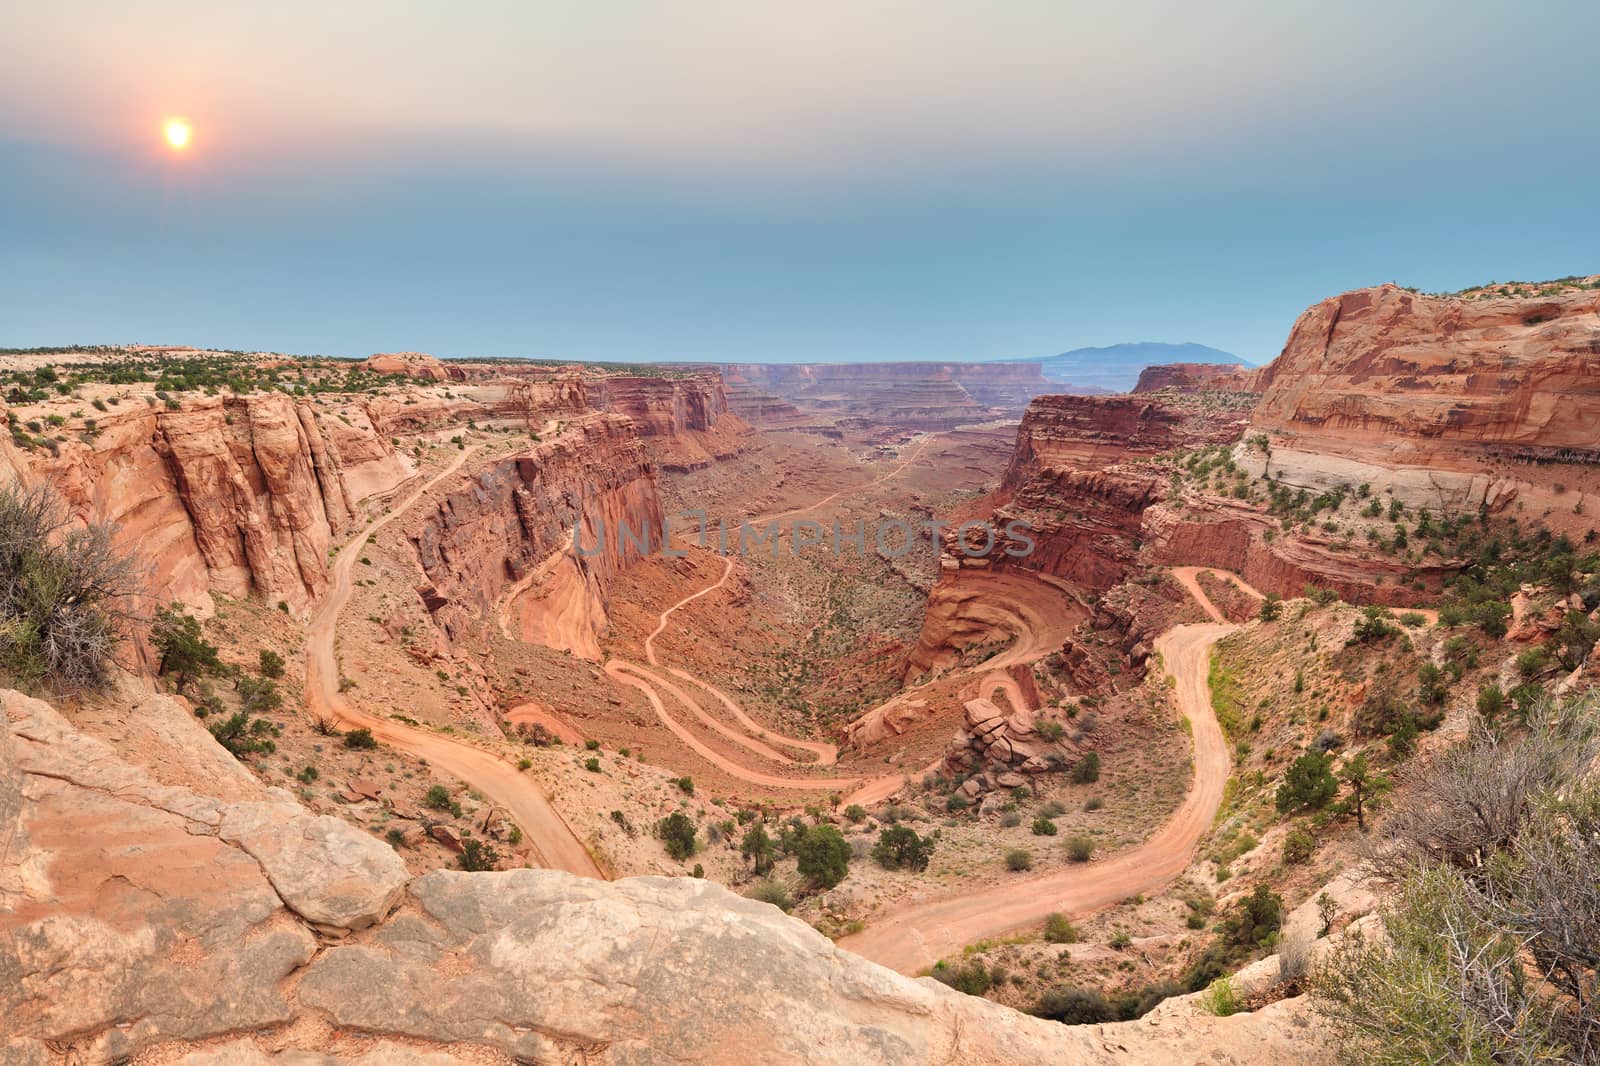 Shafer Canyon Trail in Canyonlands National Park, Utah, U.S.A.